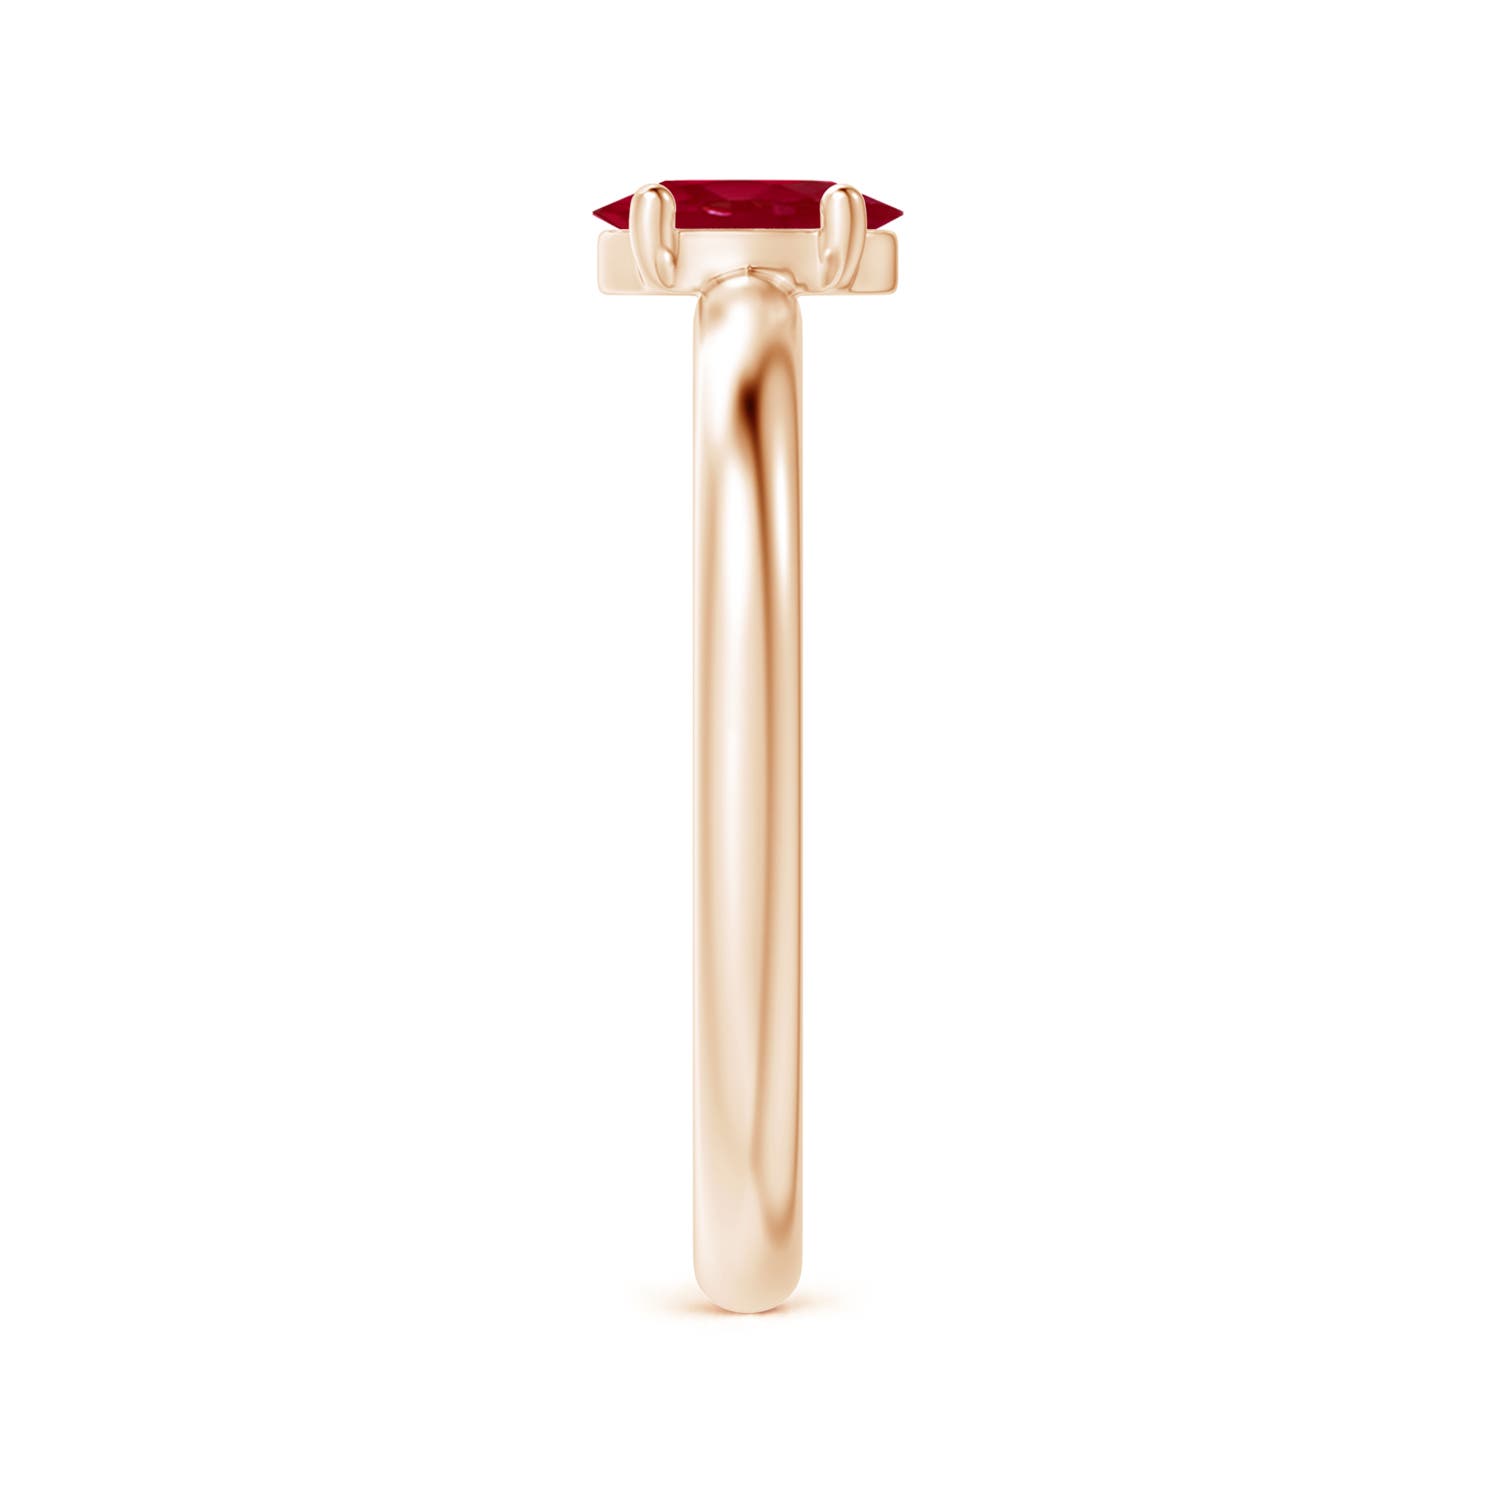 AA - Ruby / 0.6 CT / 14 KT Rose Gold